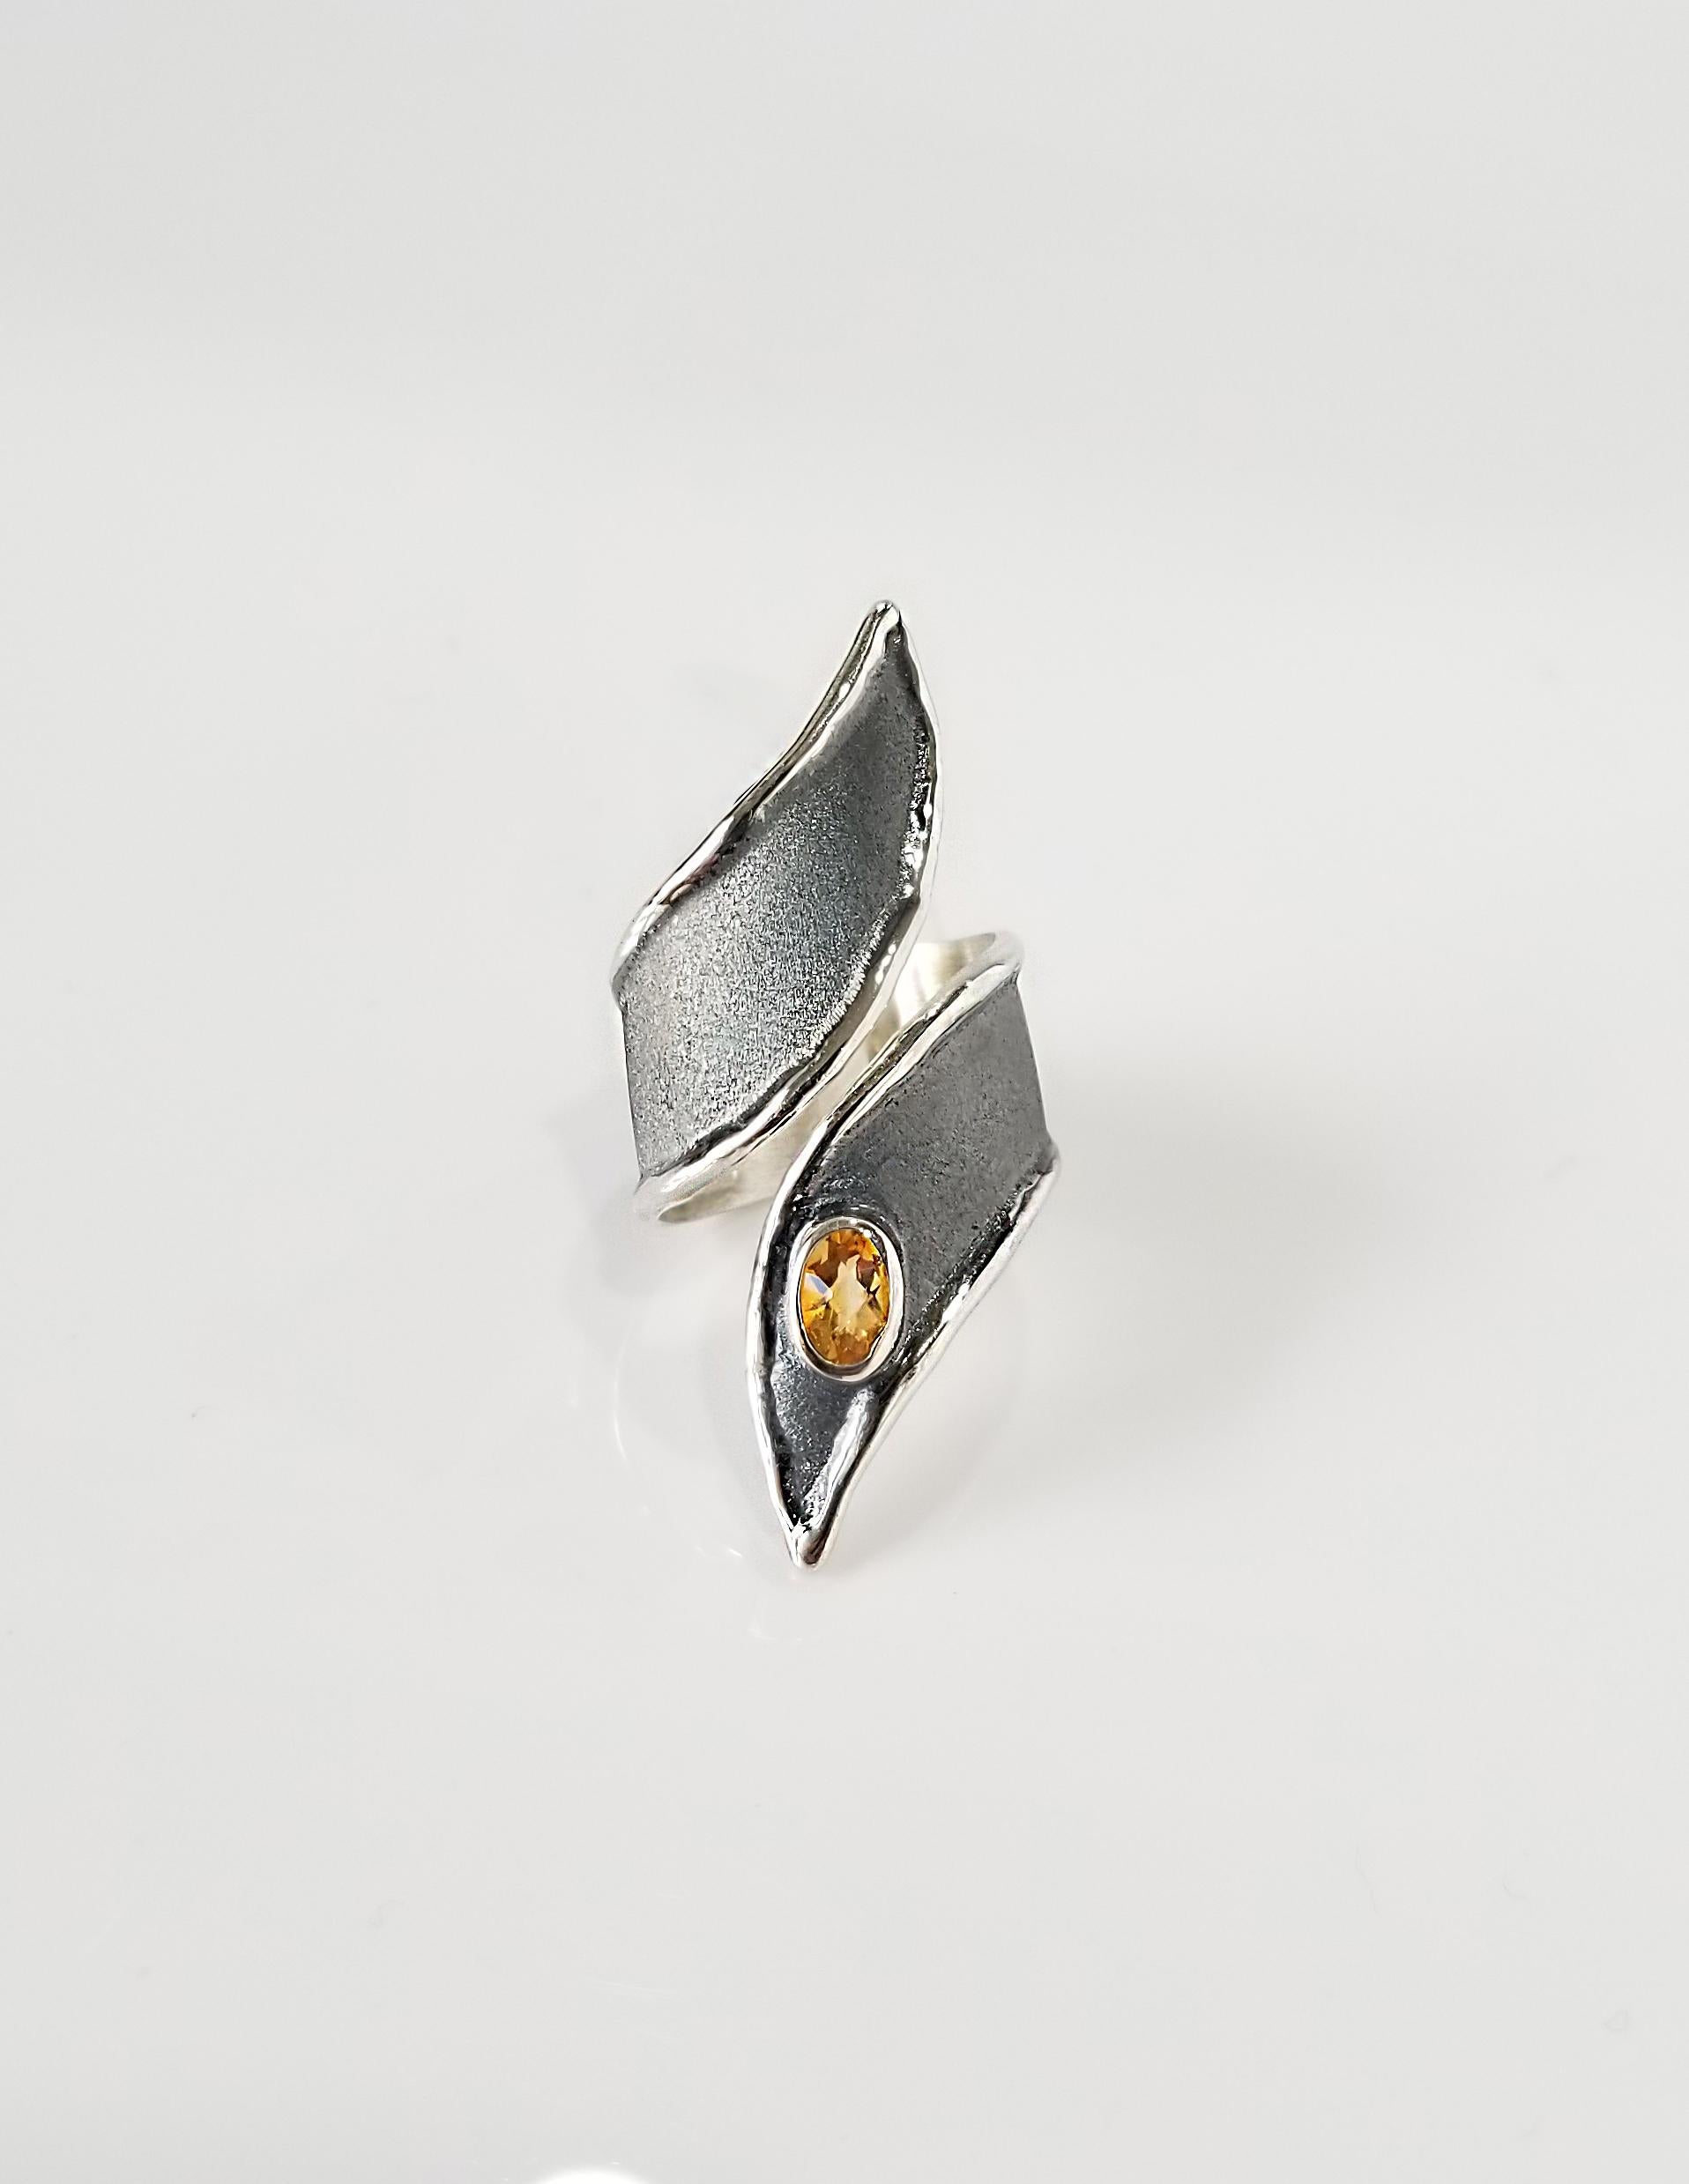 Yianni Creations Hephestos Collection 100% Handmade Artisan Ring from Fine Silver. The ring features 0.45 Carat Citrine and unique oxidized Rhodium background, complemented by unique techniques of craftsmanship - brushed texture and nature-inspired